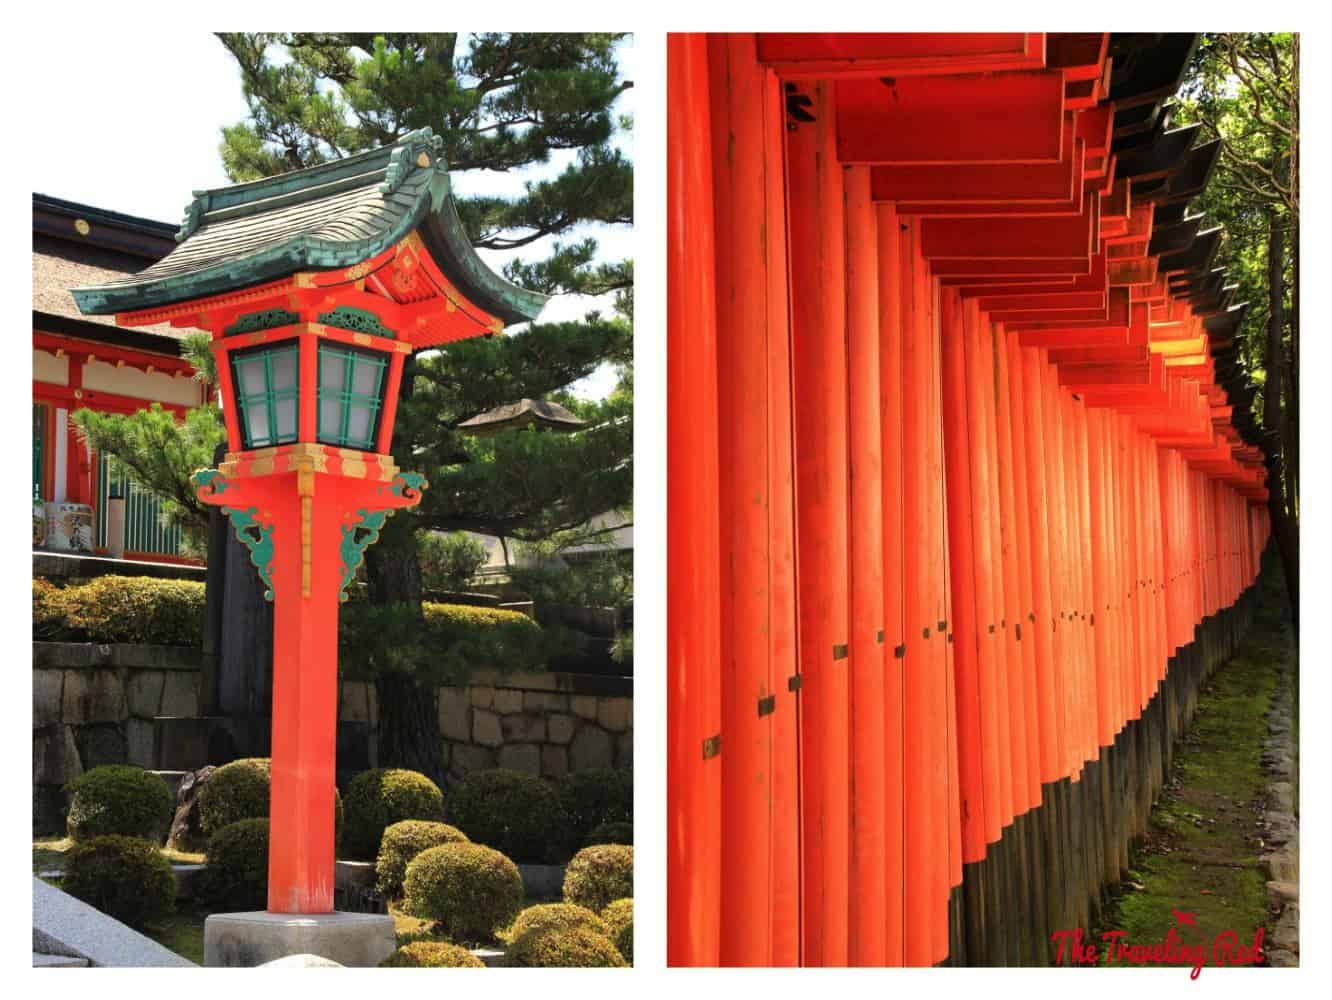 When in Kyoto you have to visit Fushimi Inari Shrine. It’s famous in Japan for the pathway of orange torii gates. They say that over 10,000 torii gates create the pathway, which is 2.5-miles long, going uphill through the woods.